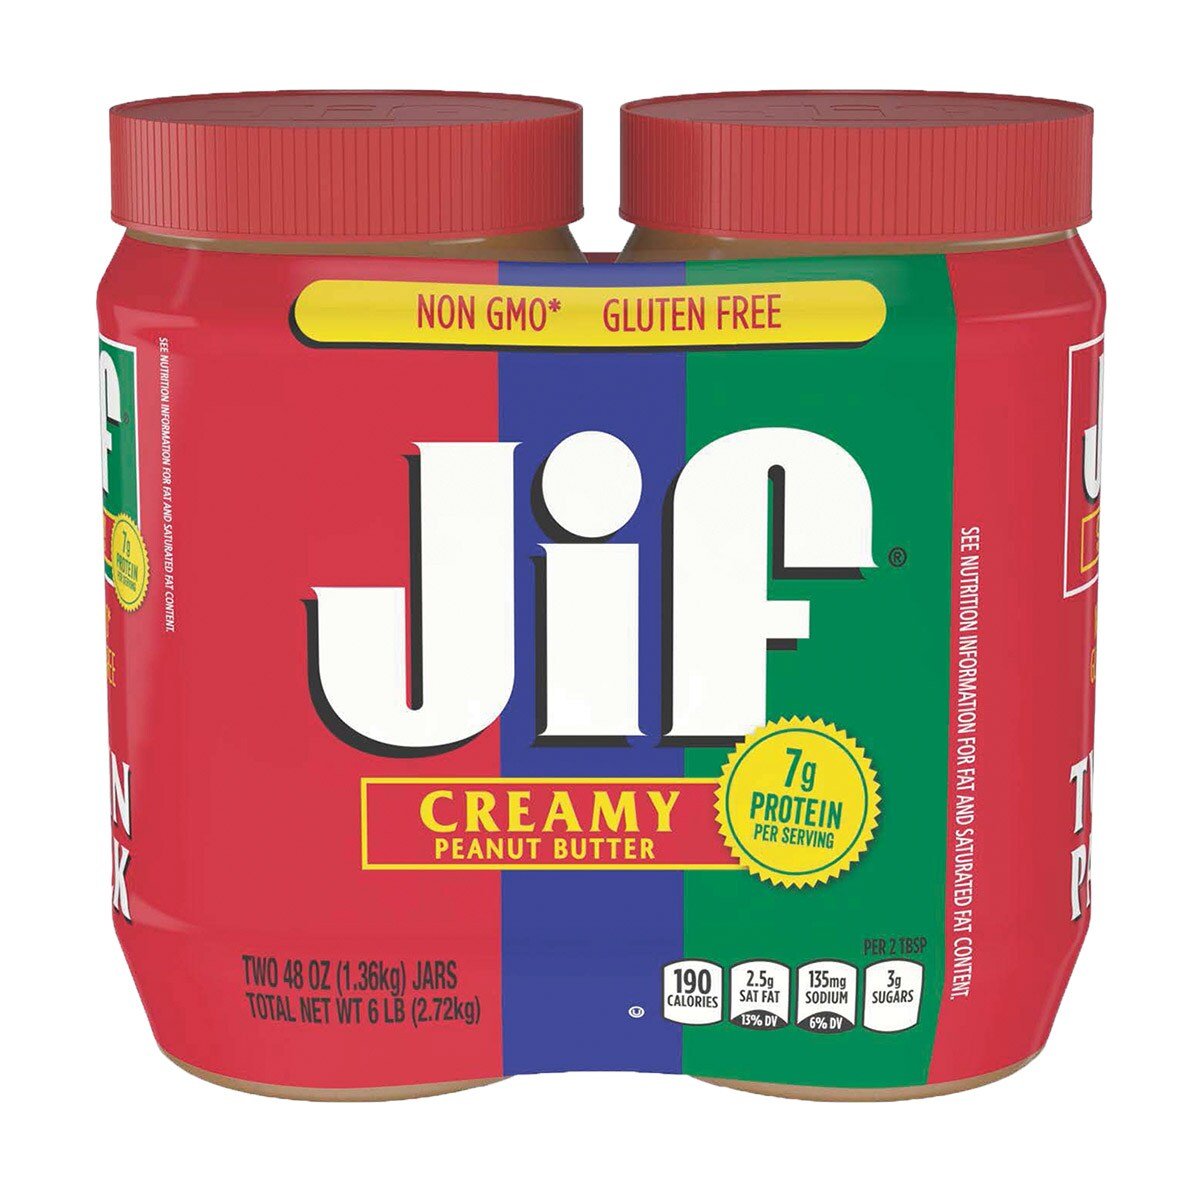 Image of Jif Creamy Peanut Butter 48oz - Pack of 2